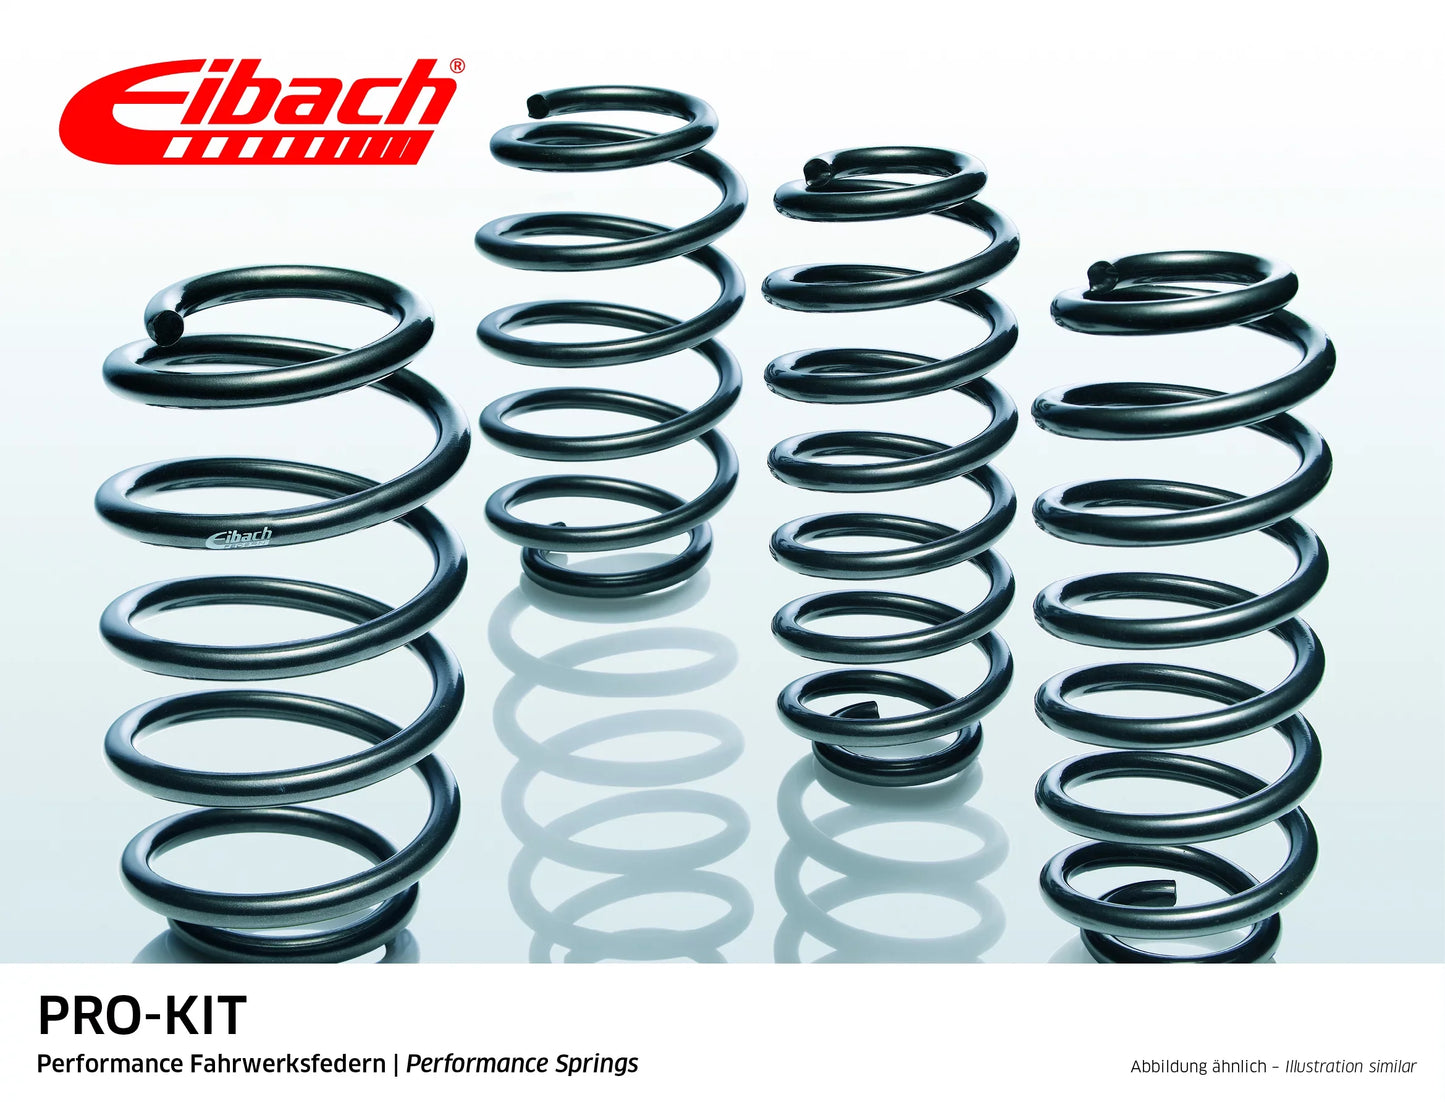 Eibach Pro-Kit Lowering Springs (E4024-140) at £305.56